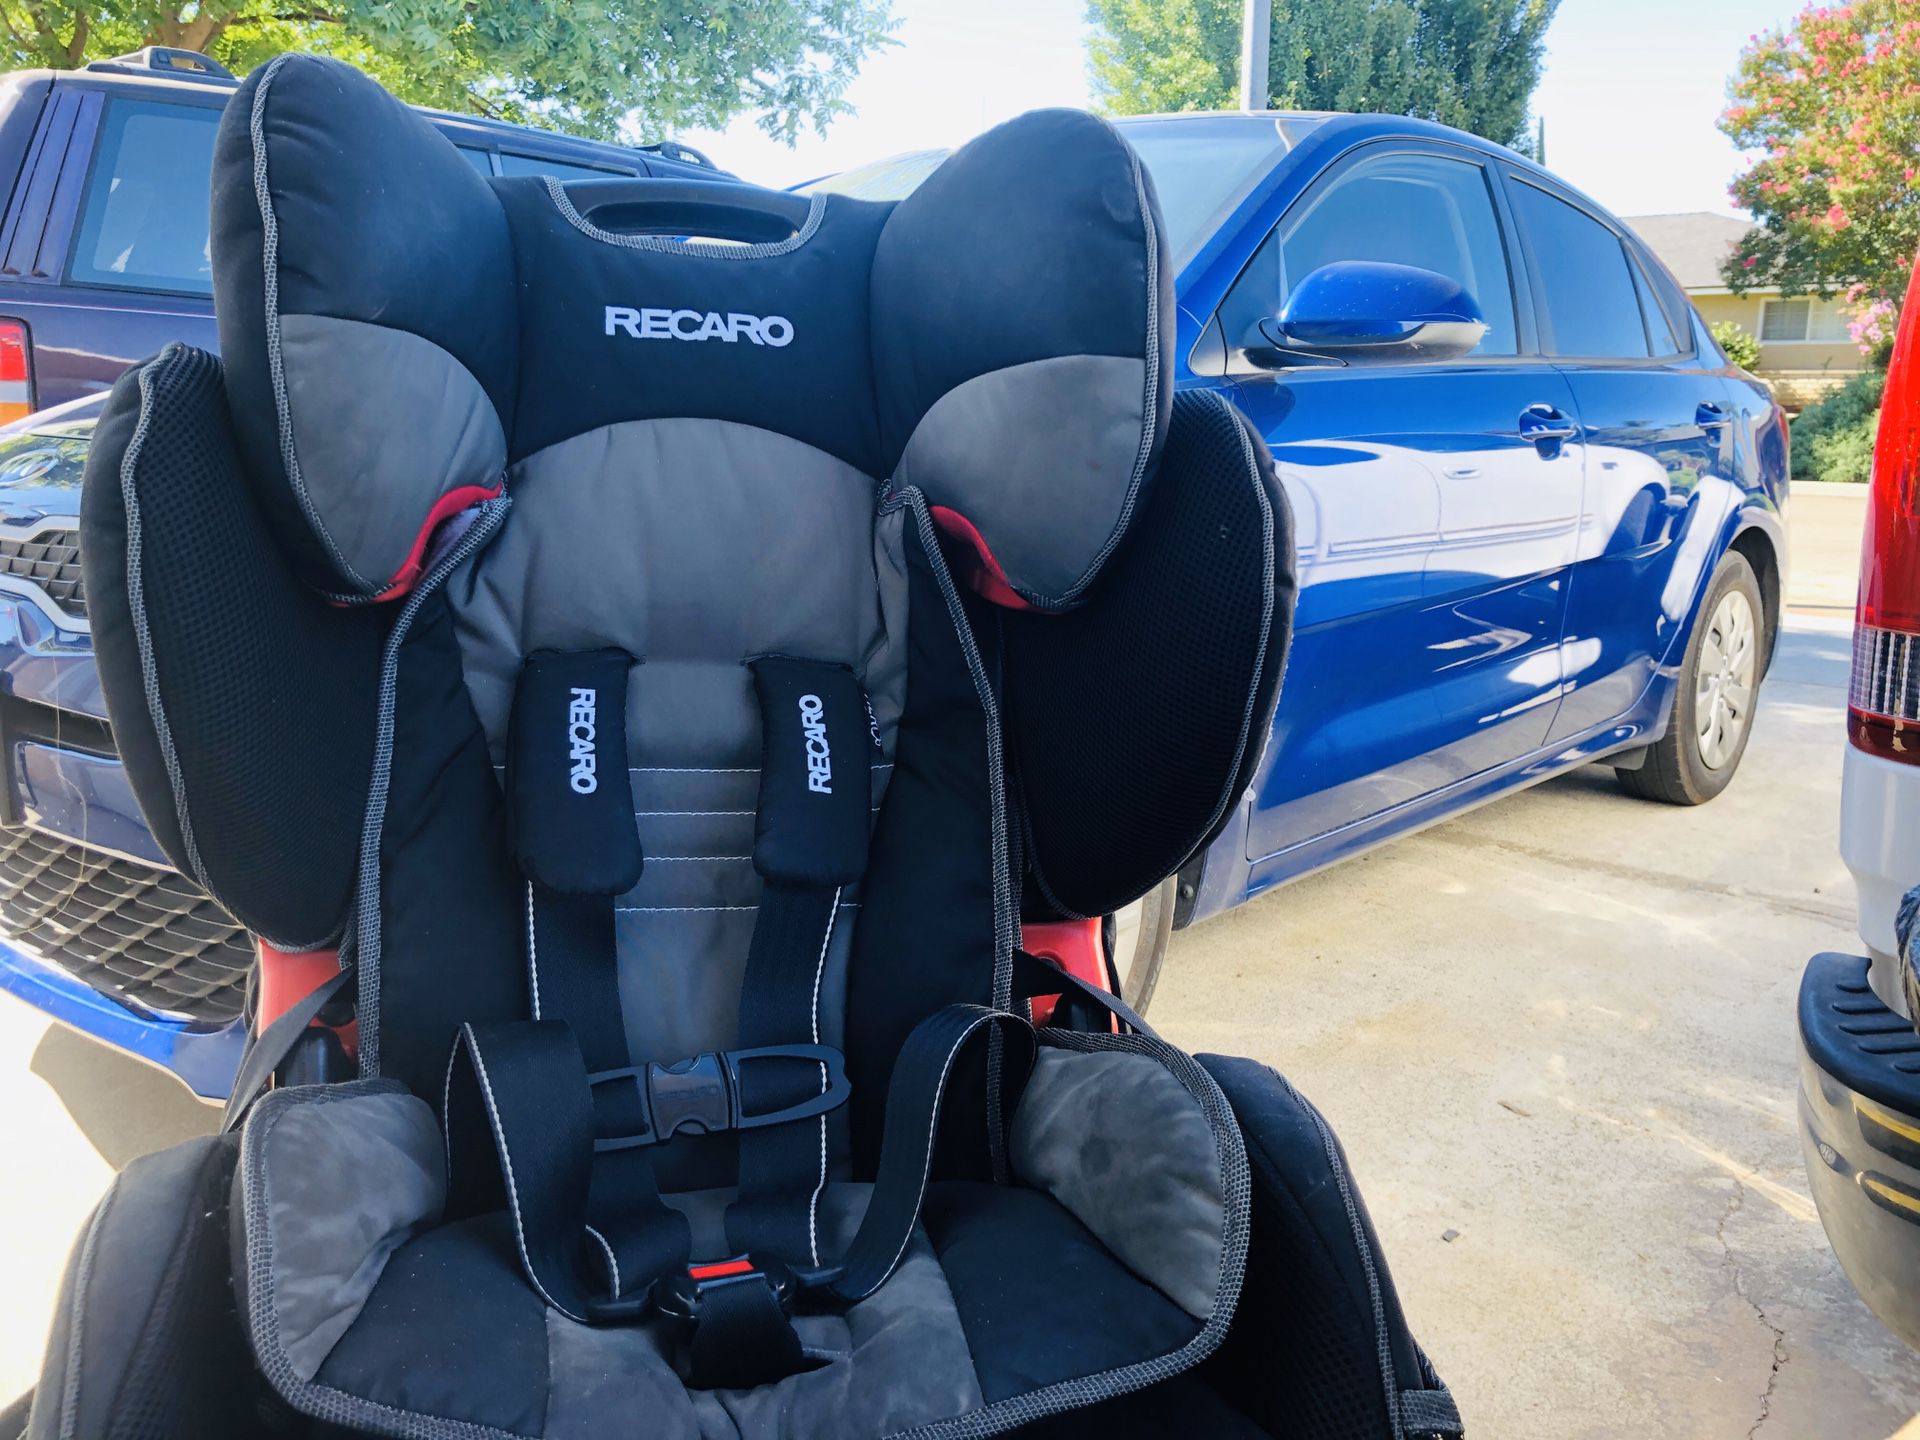 Recaro Booster Seat and Harness